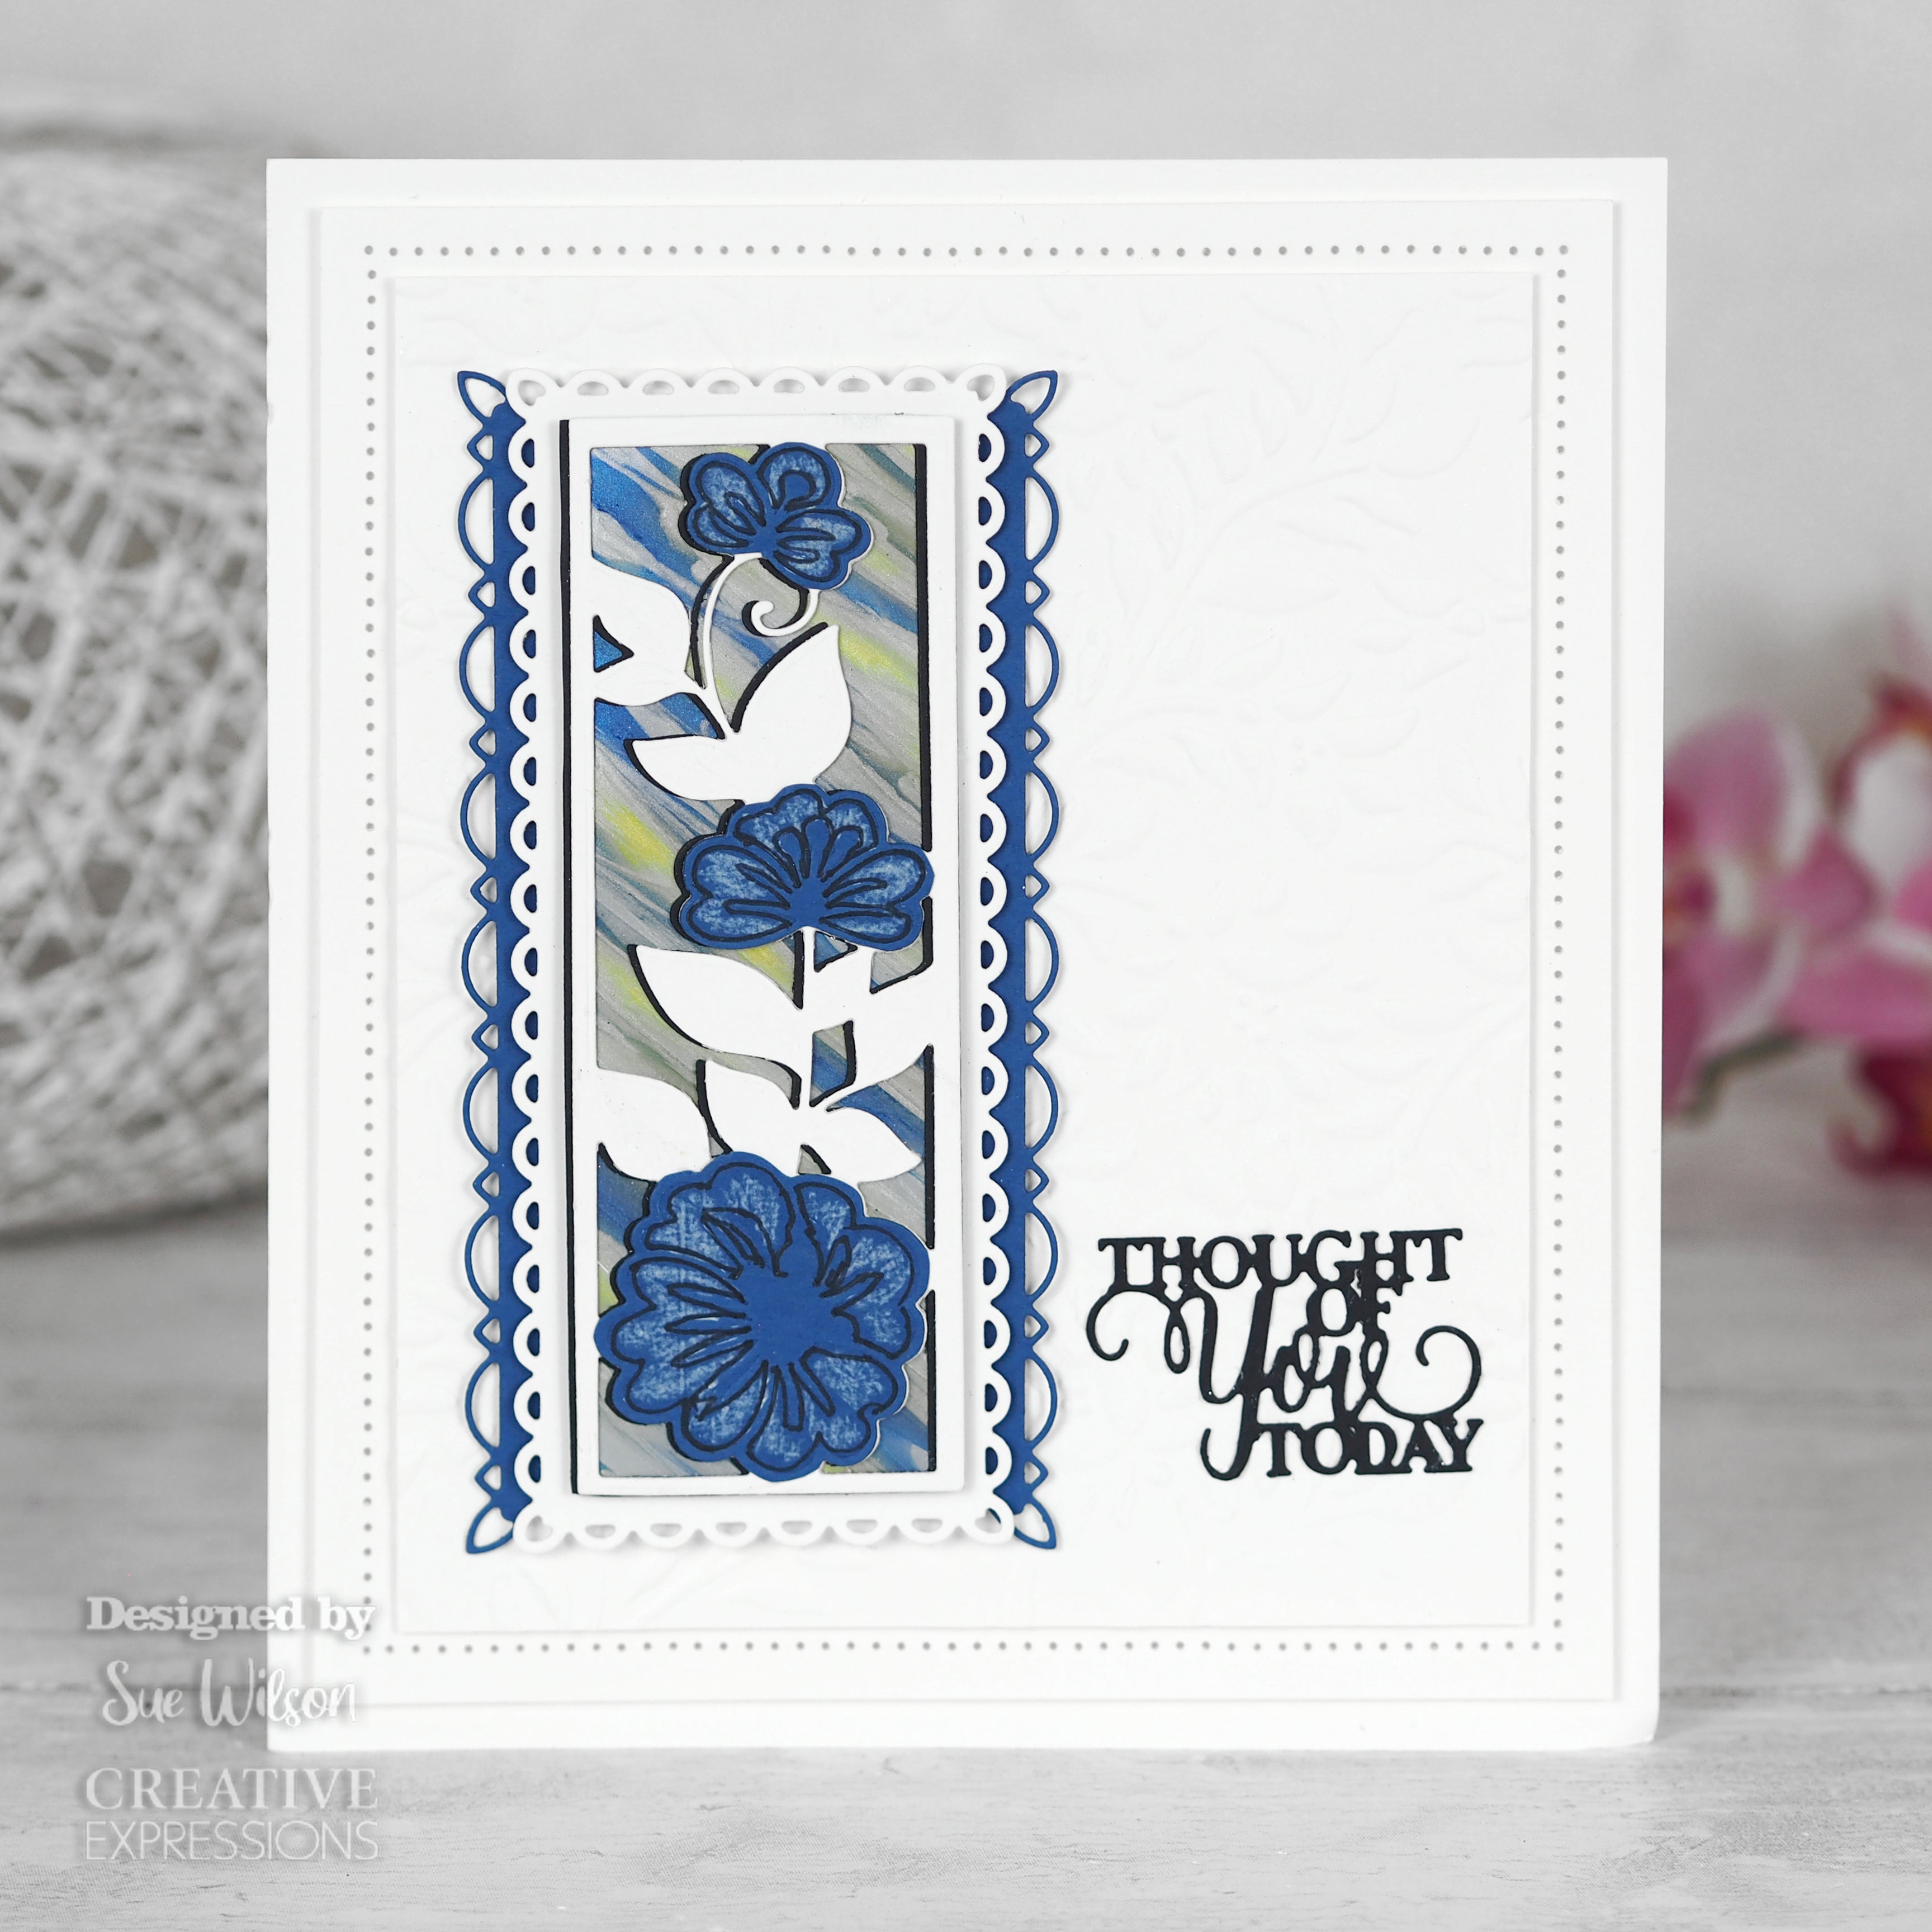 Creative Expressions Sue Wilson Mini Sentiments Thought Of You Today Craft Die